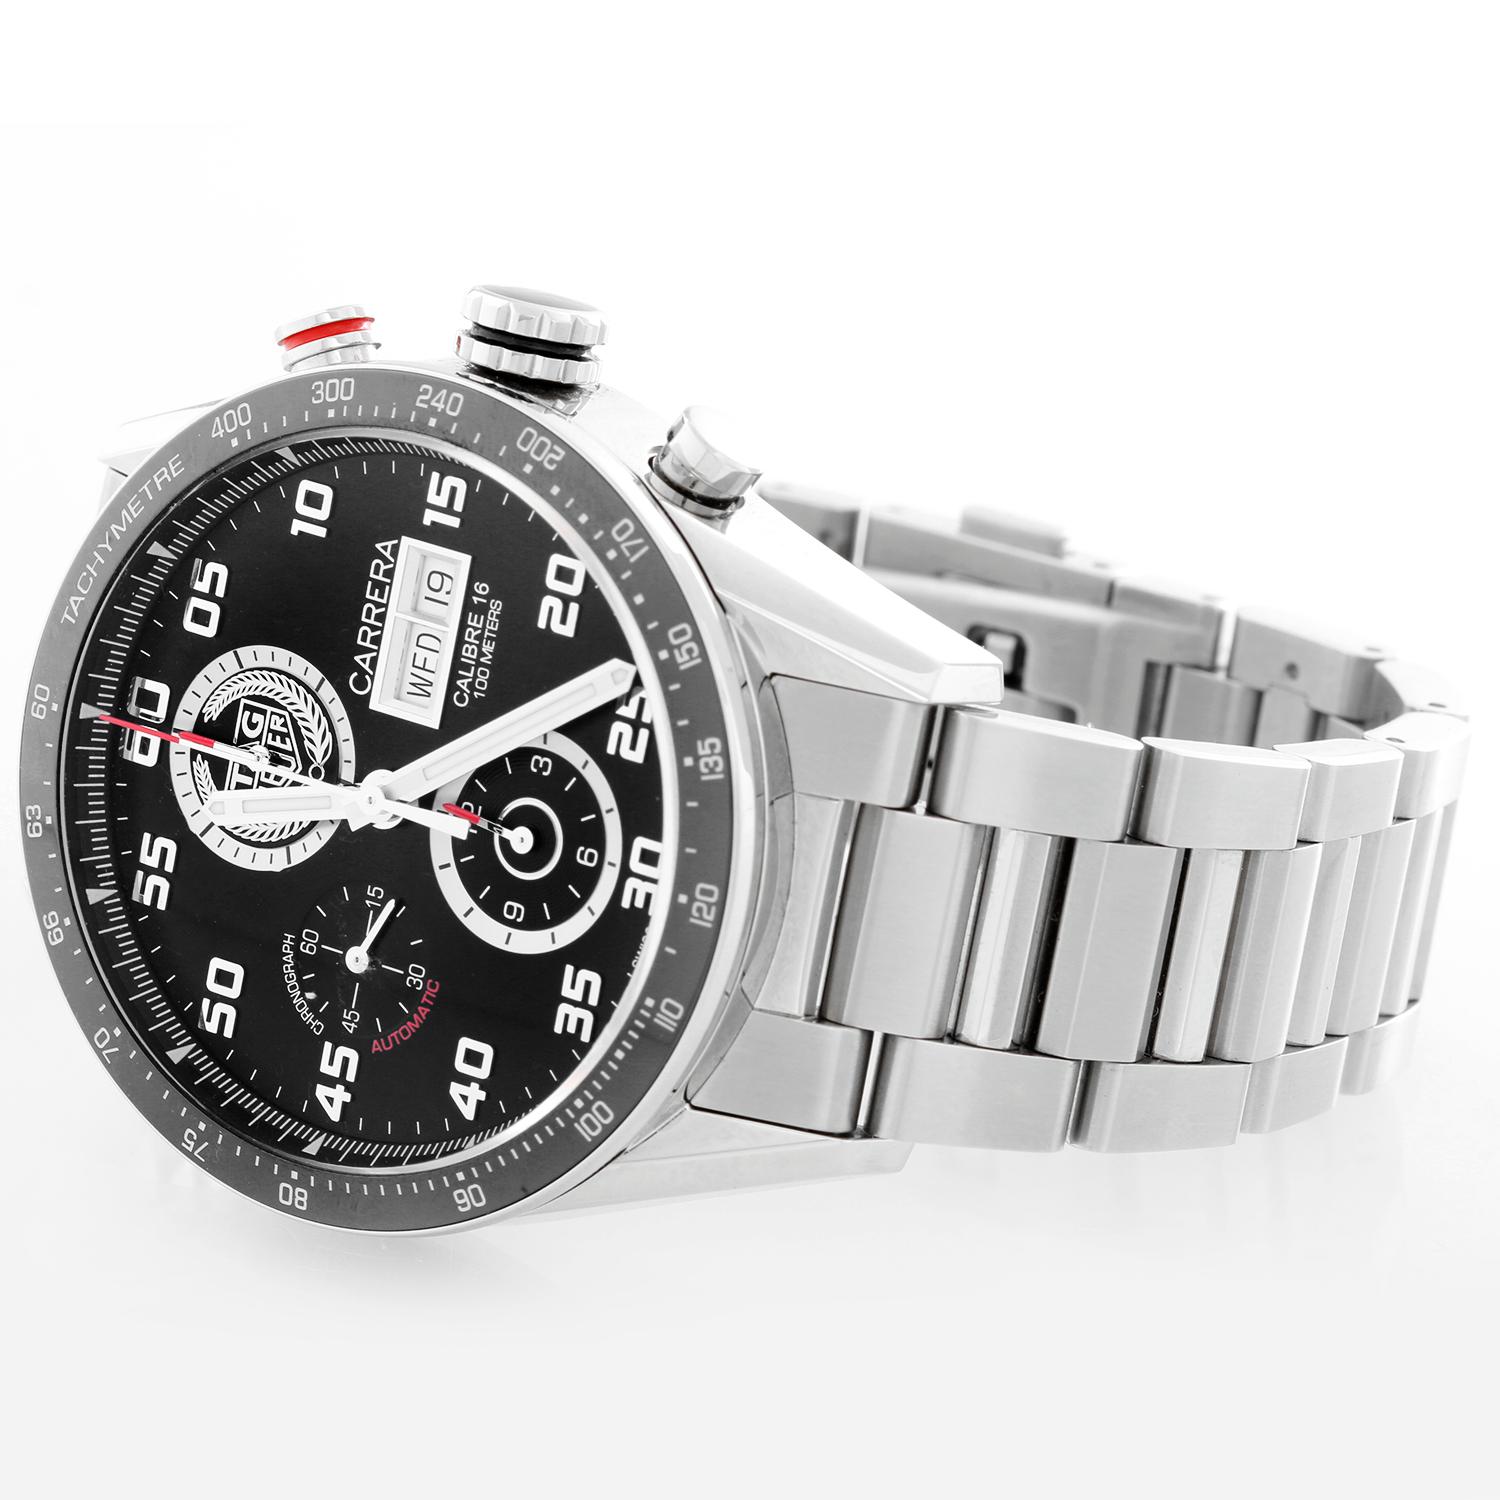 Tag Heuer Carrera Calibre 16 Automatic Chronograph Mens Watch CV2A1T - Automatic winding. Polished stainless steel case with tachymeter bezel (43mm diameter). Black dial with raised Arabic numerals. Big date at 3 o'clock. Stainless steel case; will